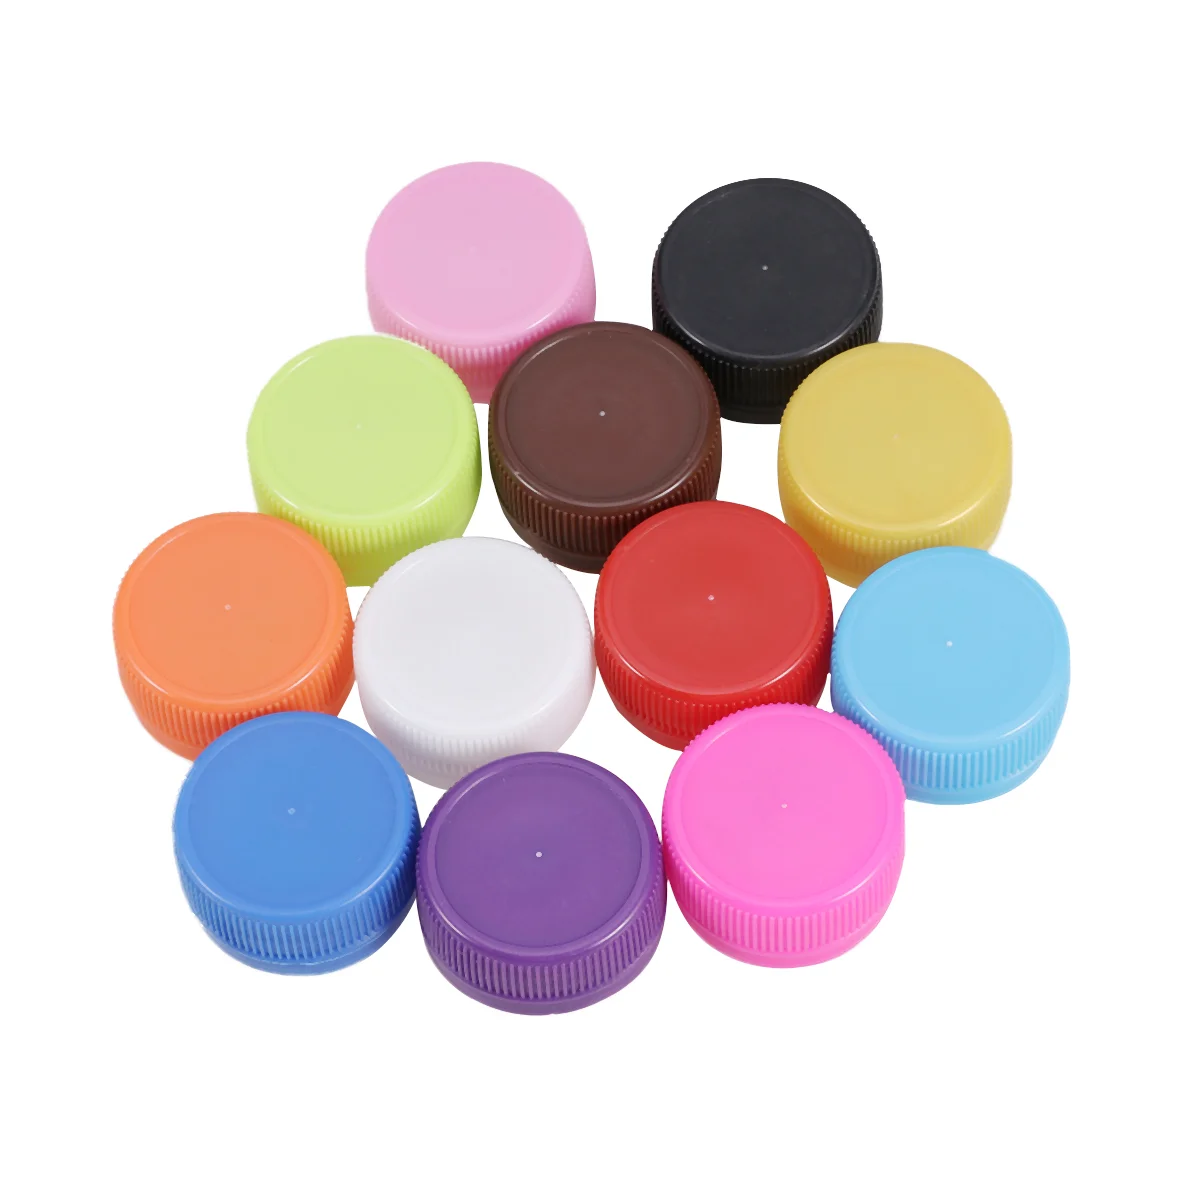 

Bottle Caps Cap Plastic Diy Craft Lids Crafts Beer Kids Cover Decorative Water Stickers Recycle Scrapbook White Lid Protection